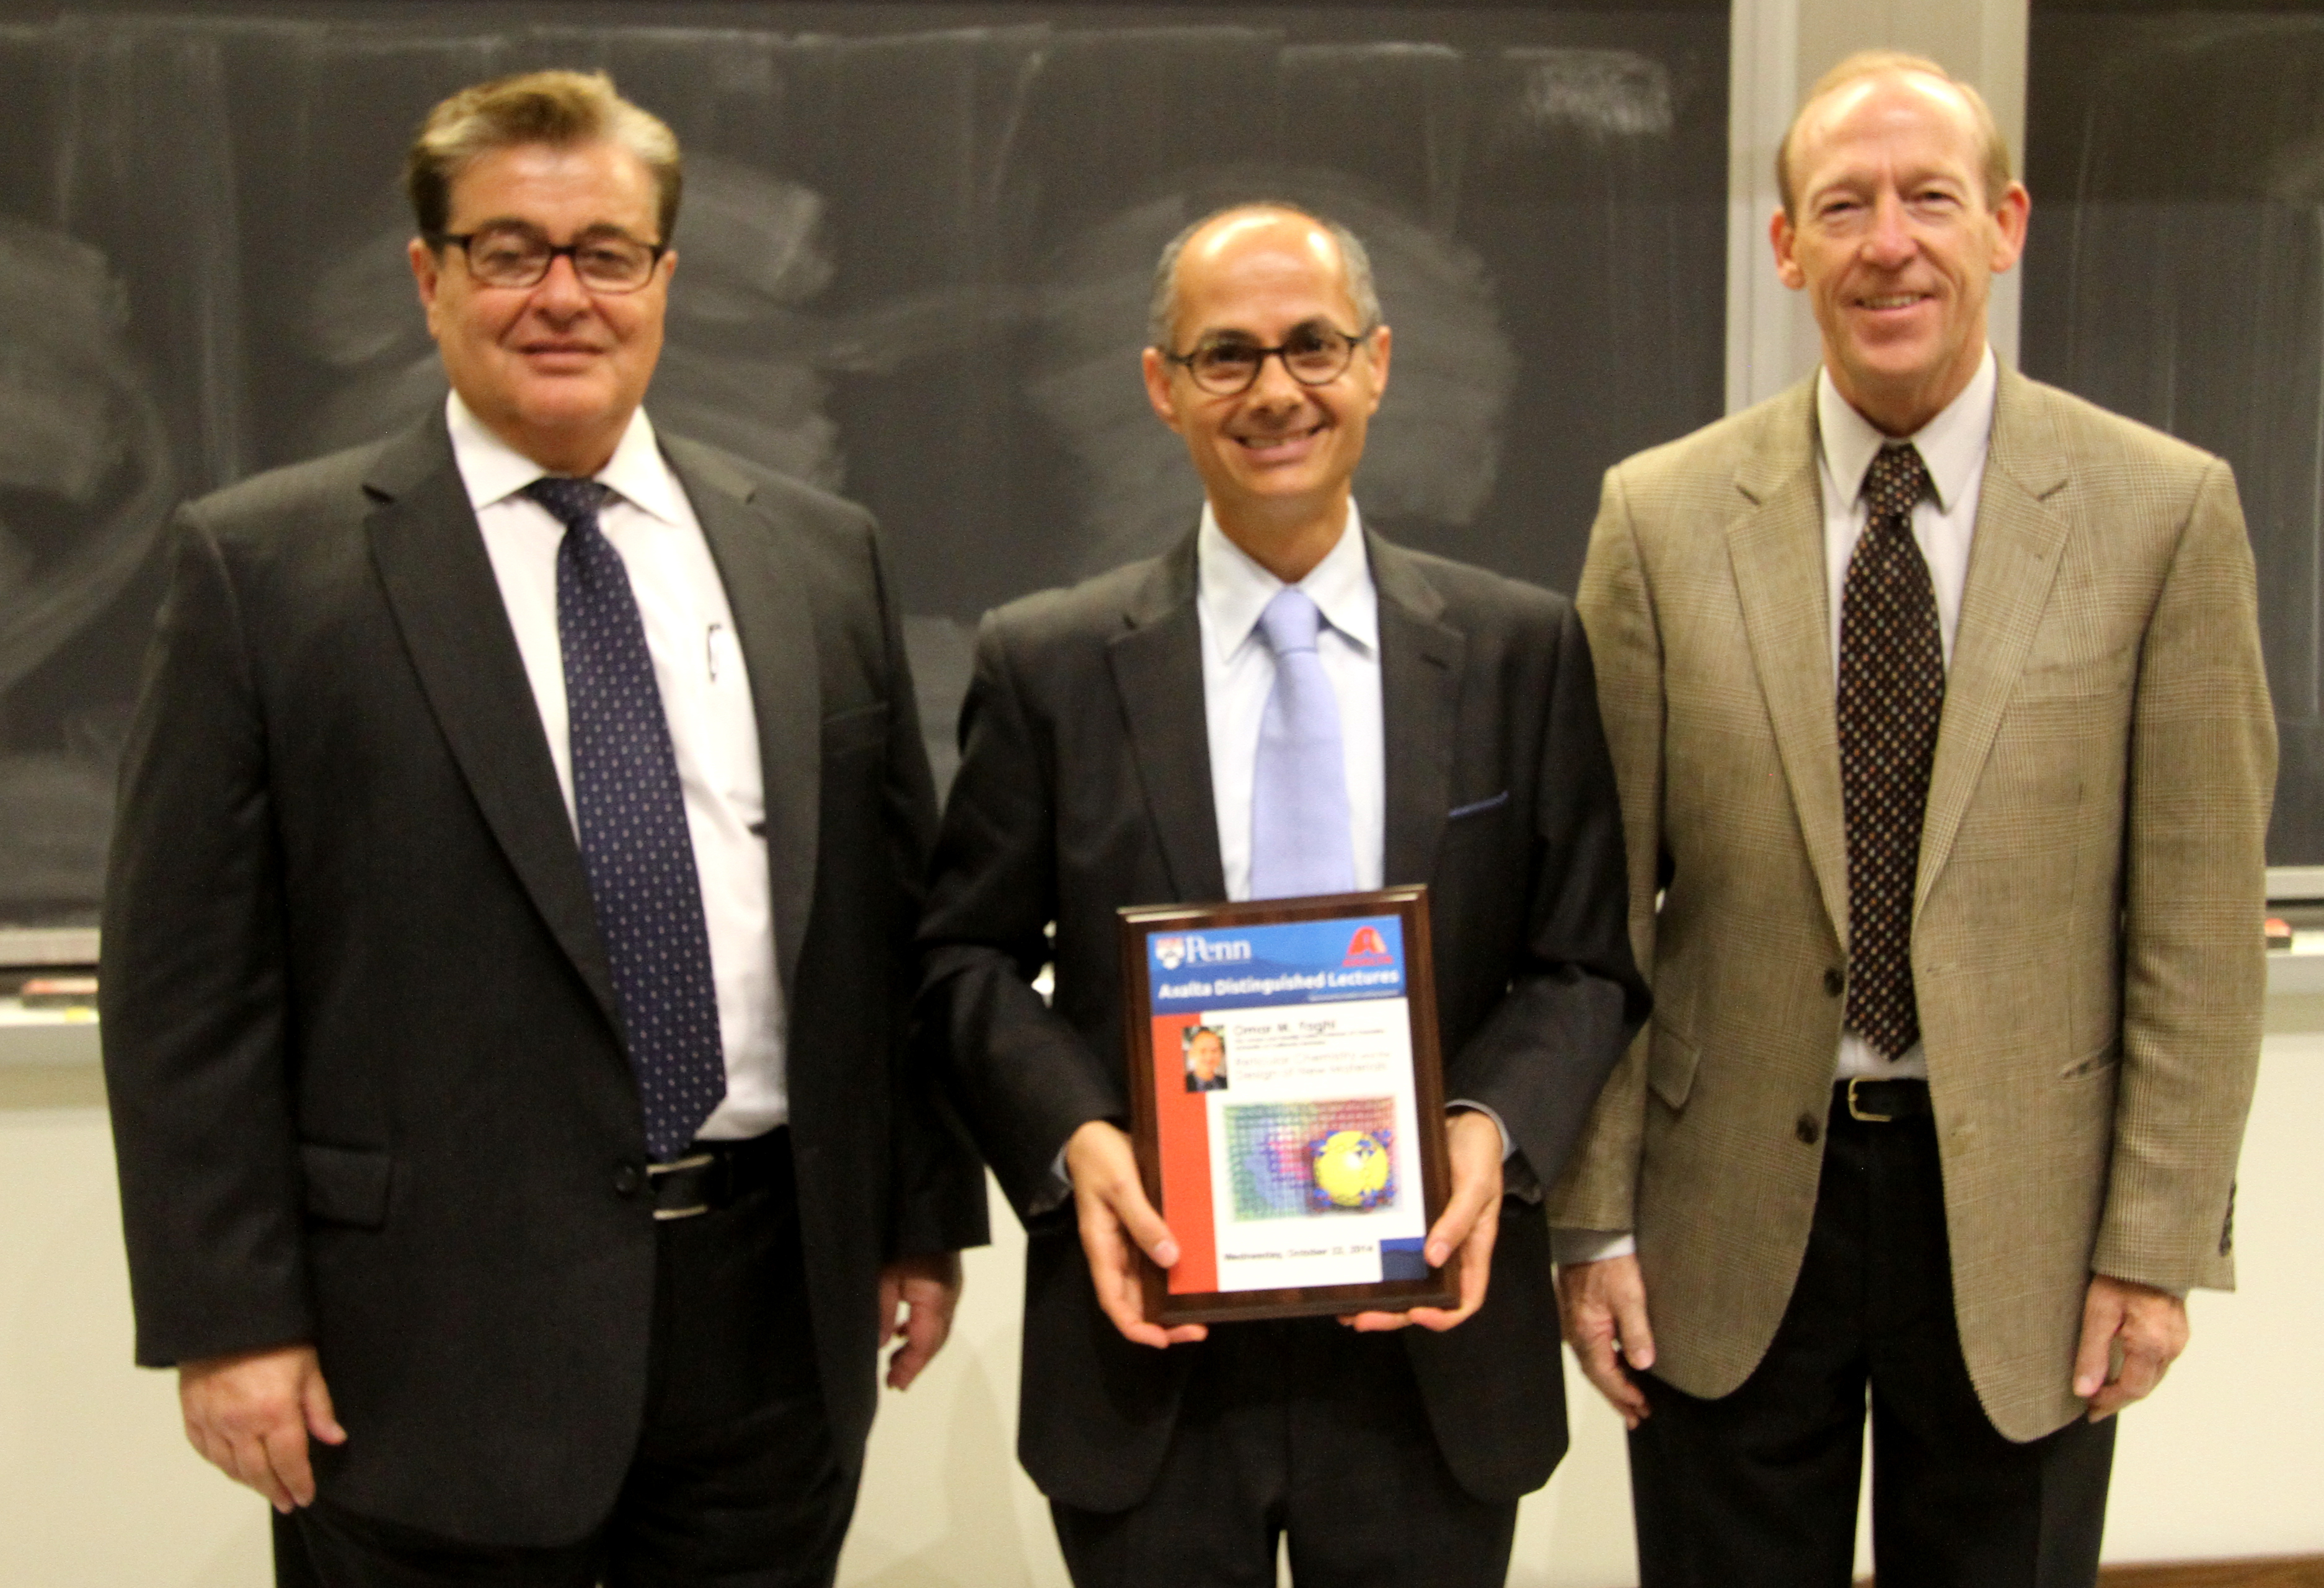 Axalta's Distinguished Lecture Series at University of Pennsylvania  Features Professor Omar Yaghi's Presentation on Metal-organic Frameworks |  Business Wire